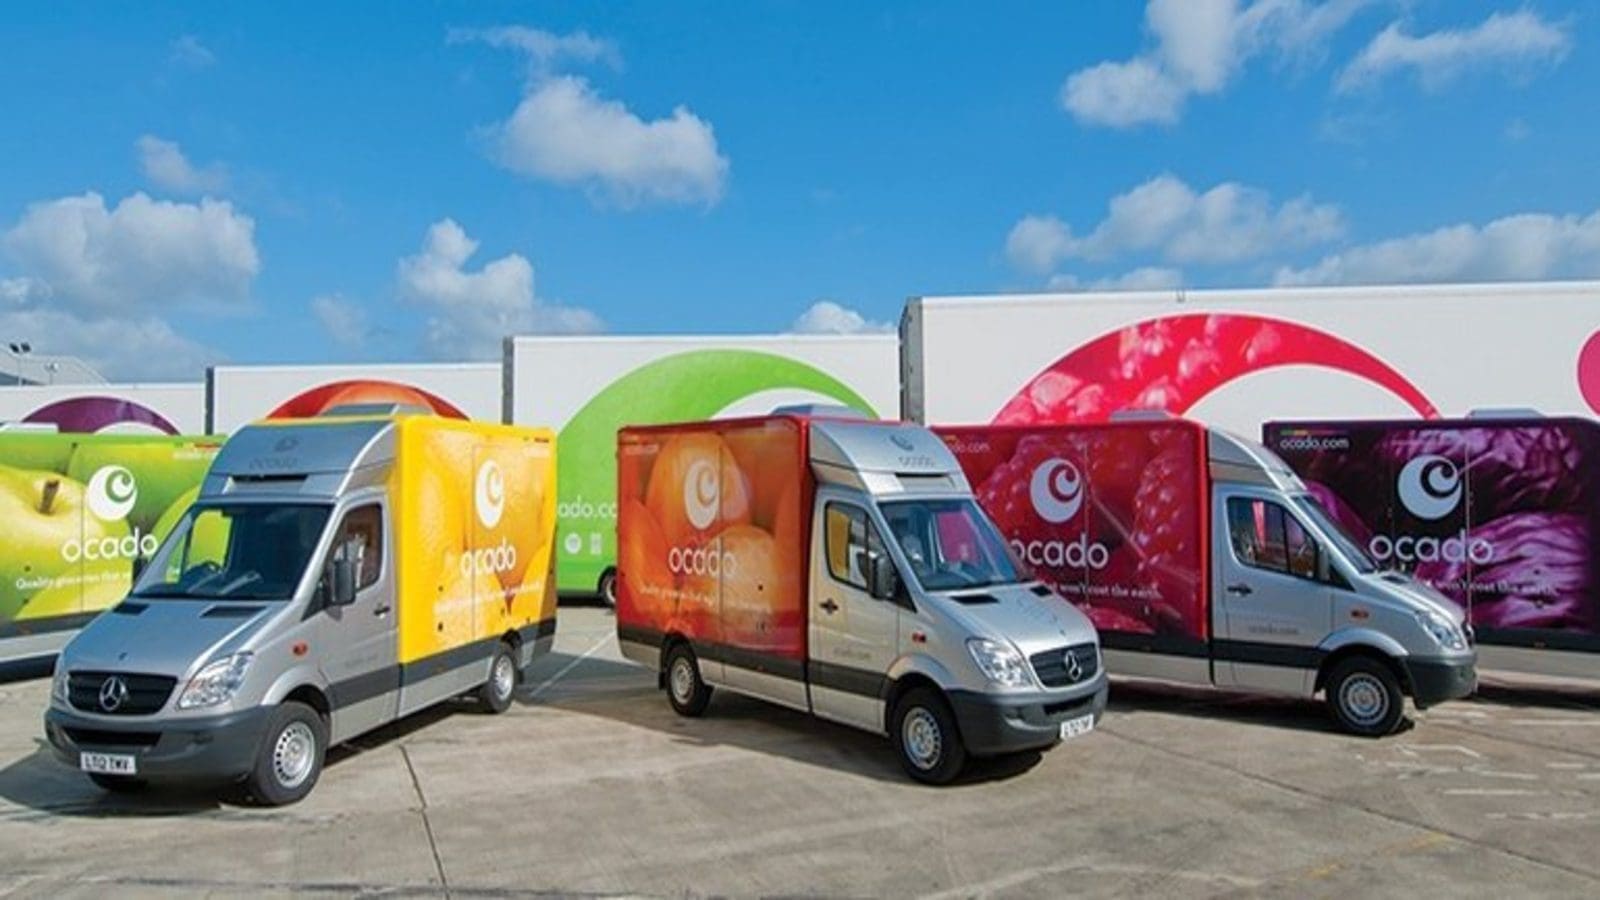 Ocado invests in autonomous driving, Instacart expands e-commerce capabilities with acquisition of FoodStorm